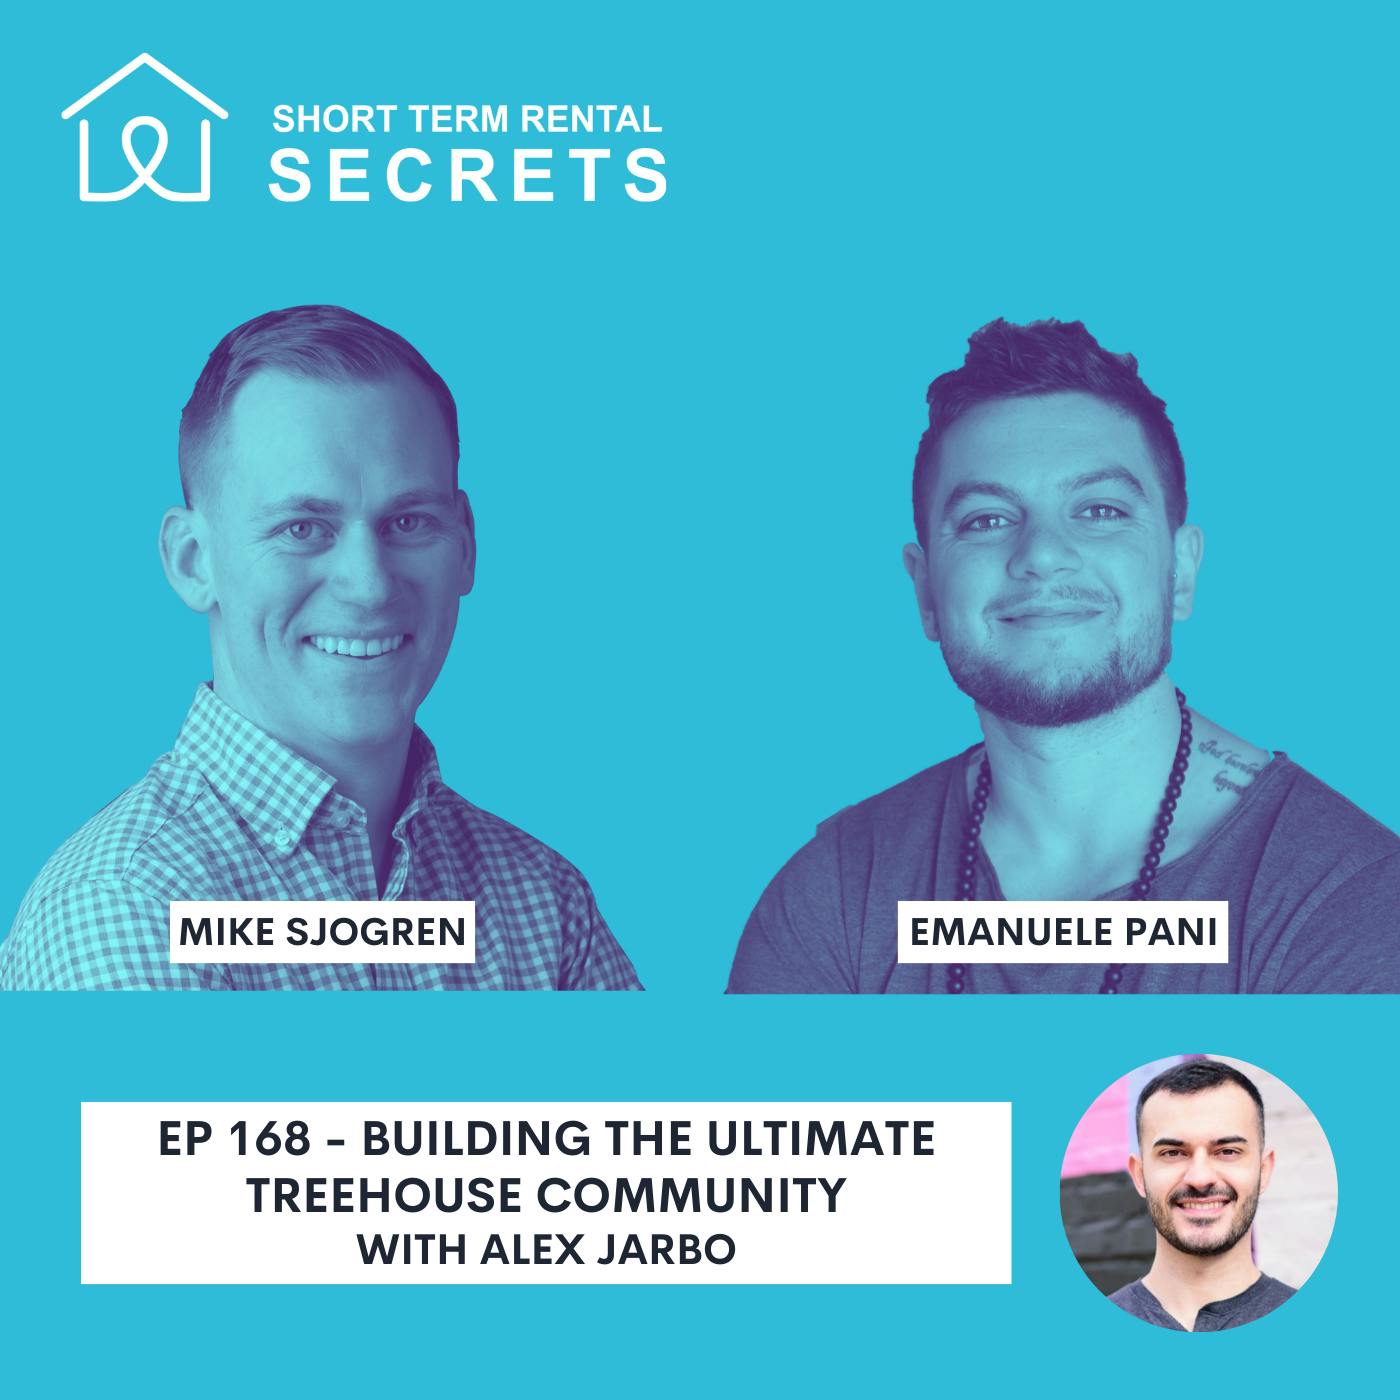 Ep 168 - Building the Ultimate Treehouse Community with Alex Jarbo